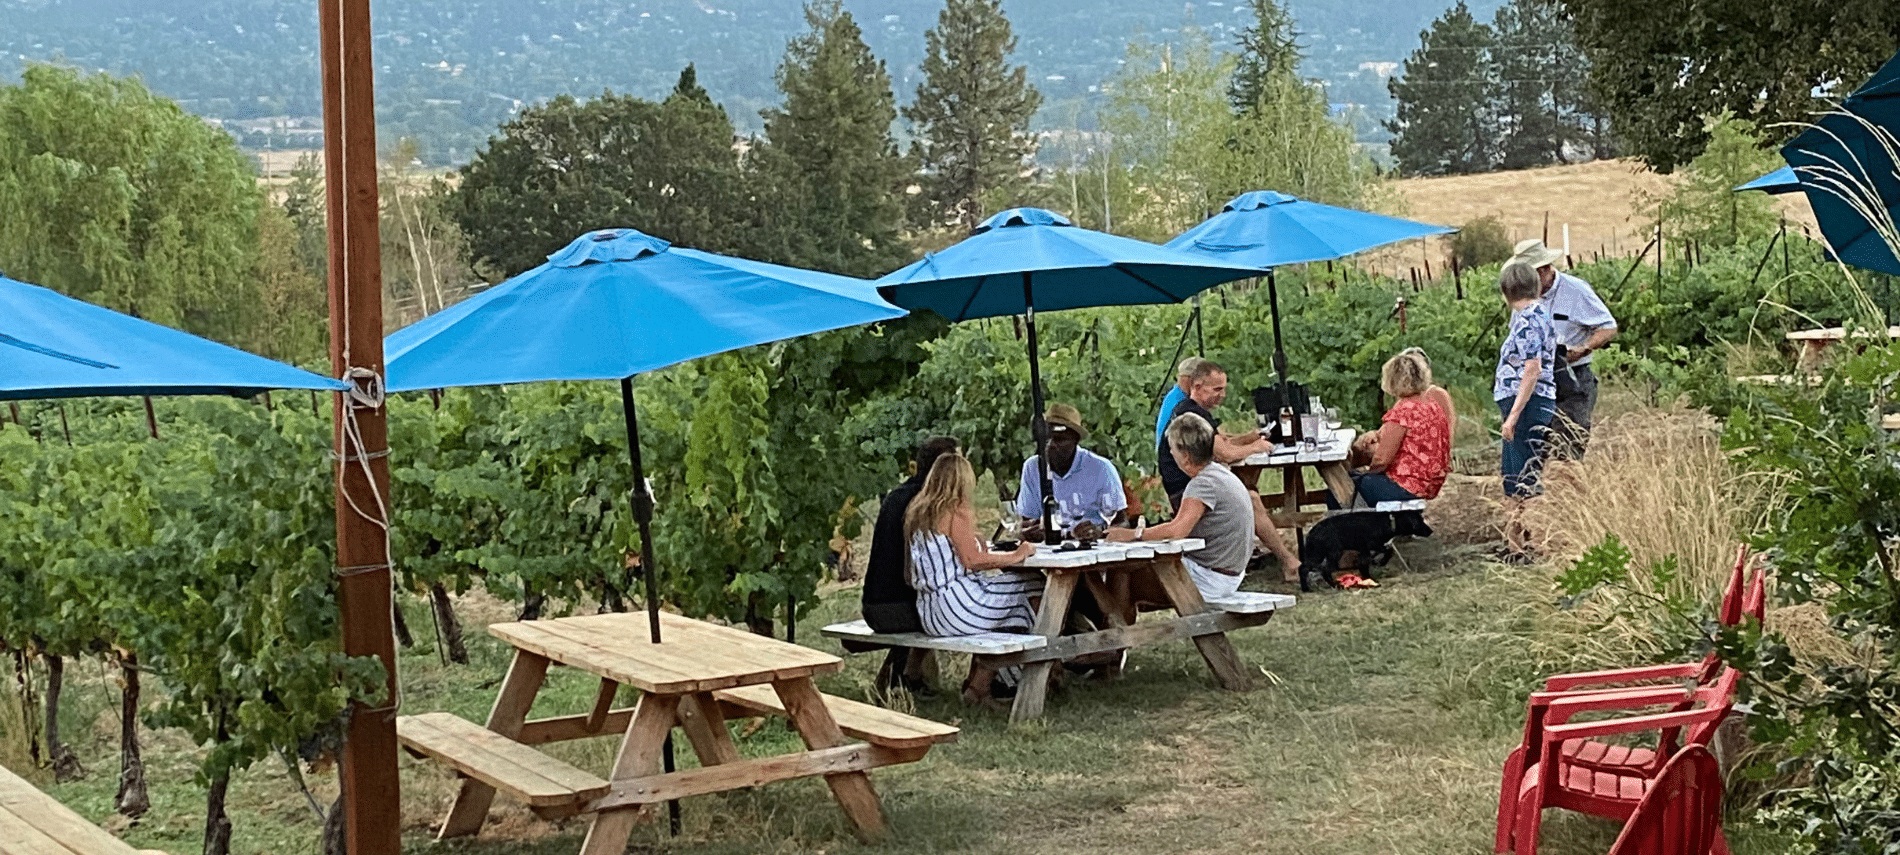 Vineyard get together in the summer in the Rogue Valley Wine Region